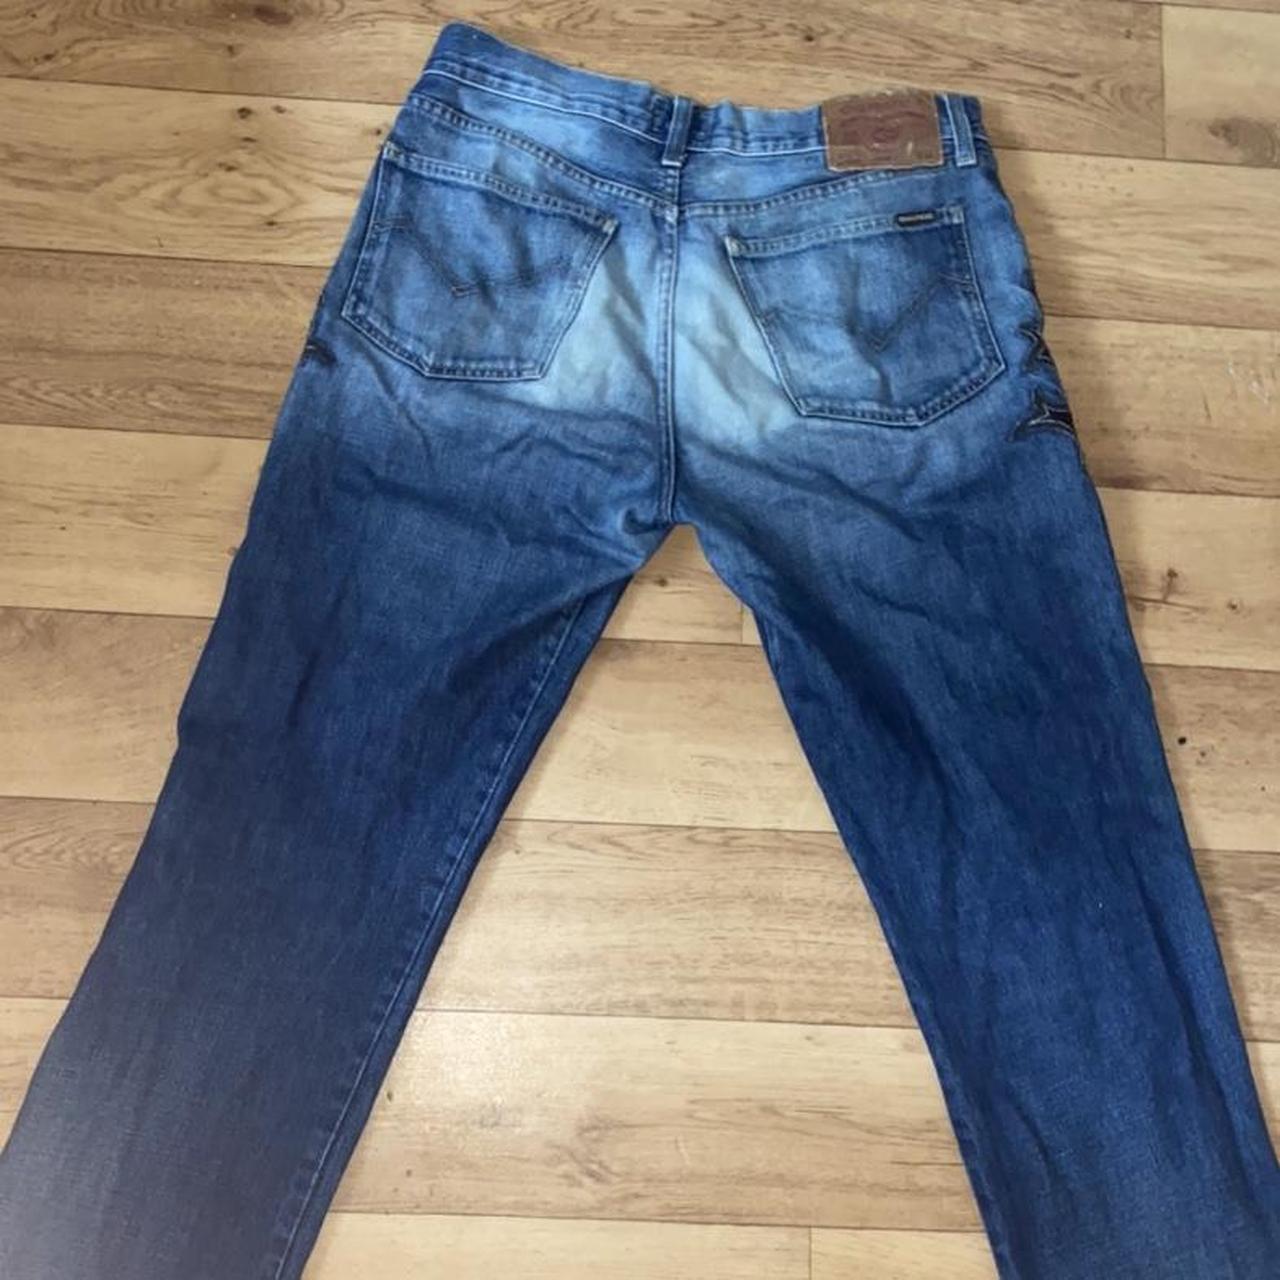 00s jean with a leather pattern - Depop